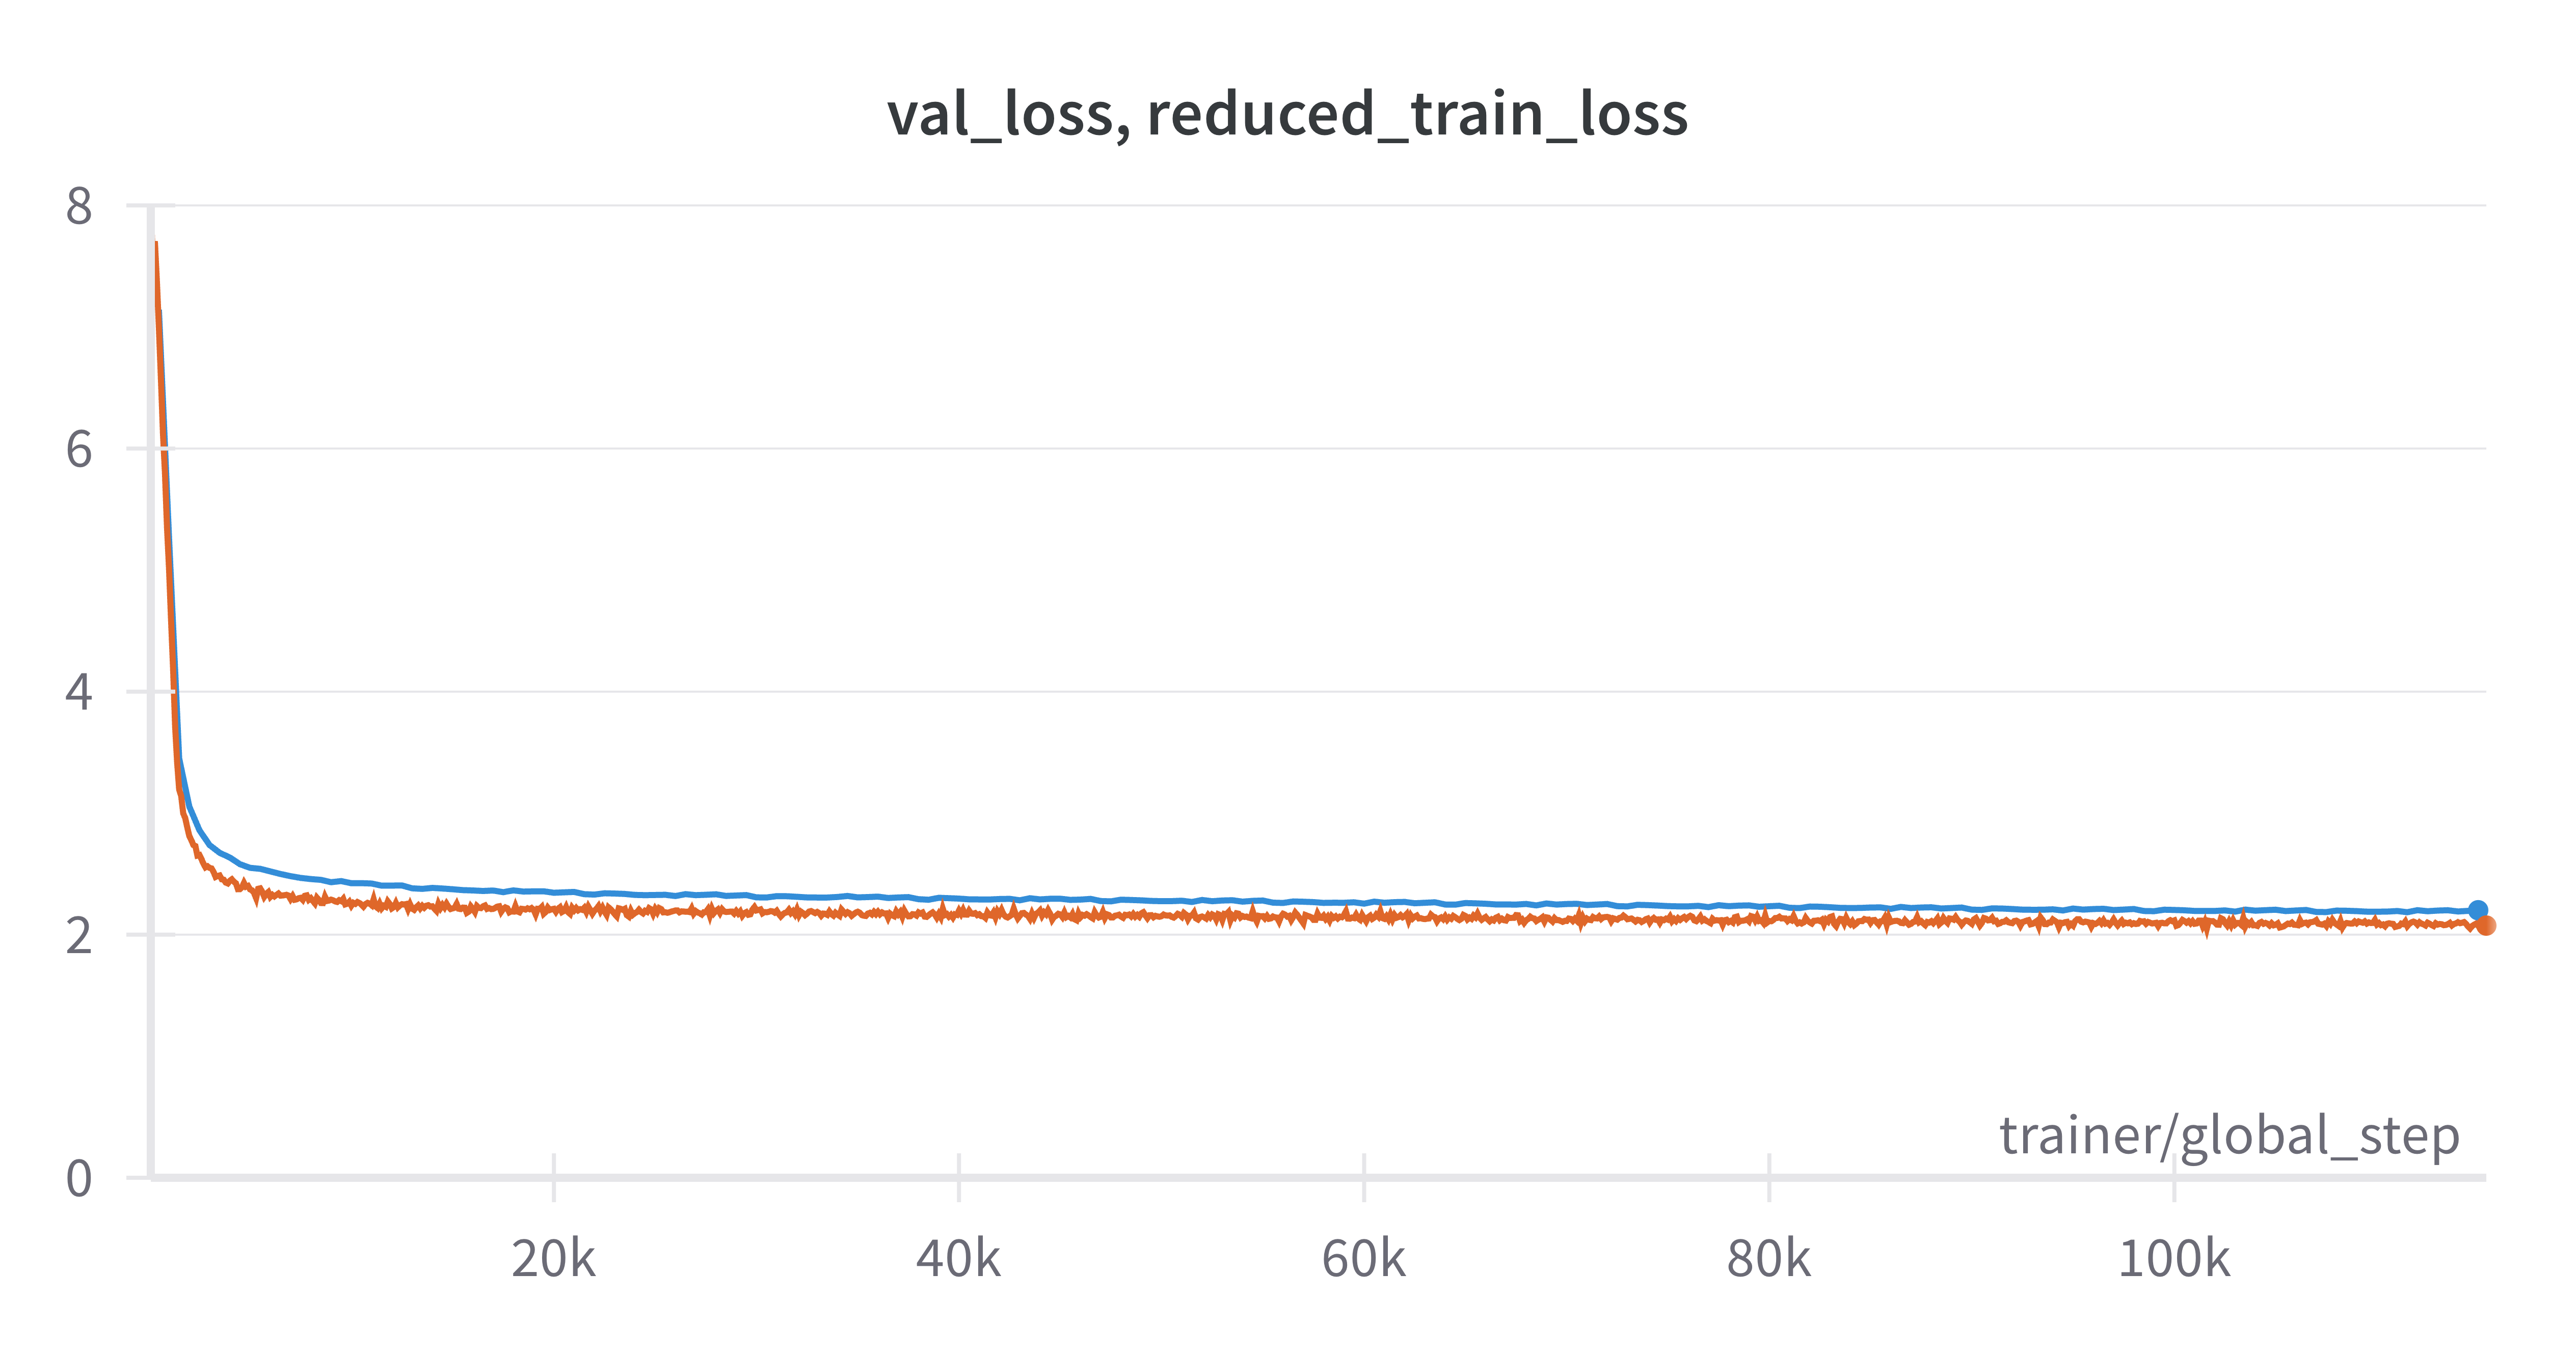 Validation and training losses both decreased smoothly through training